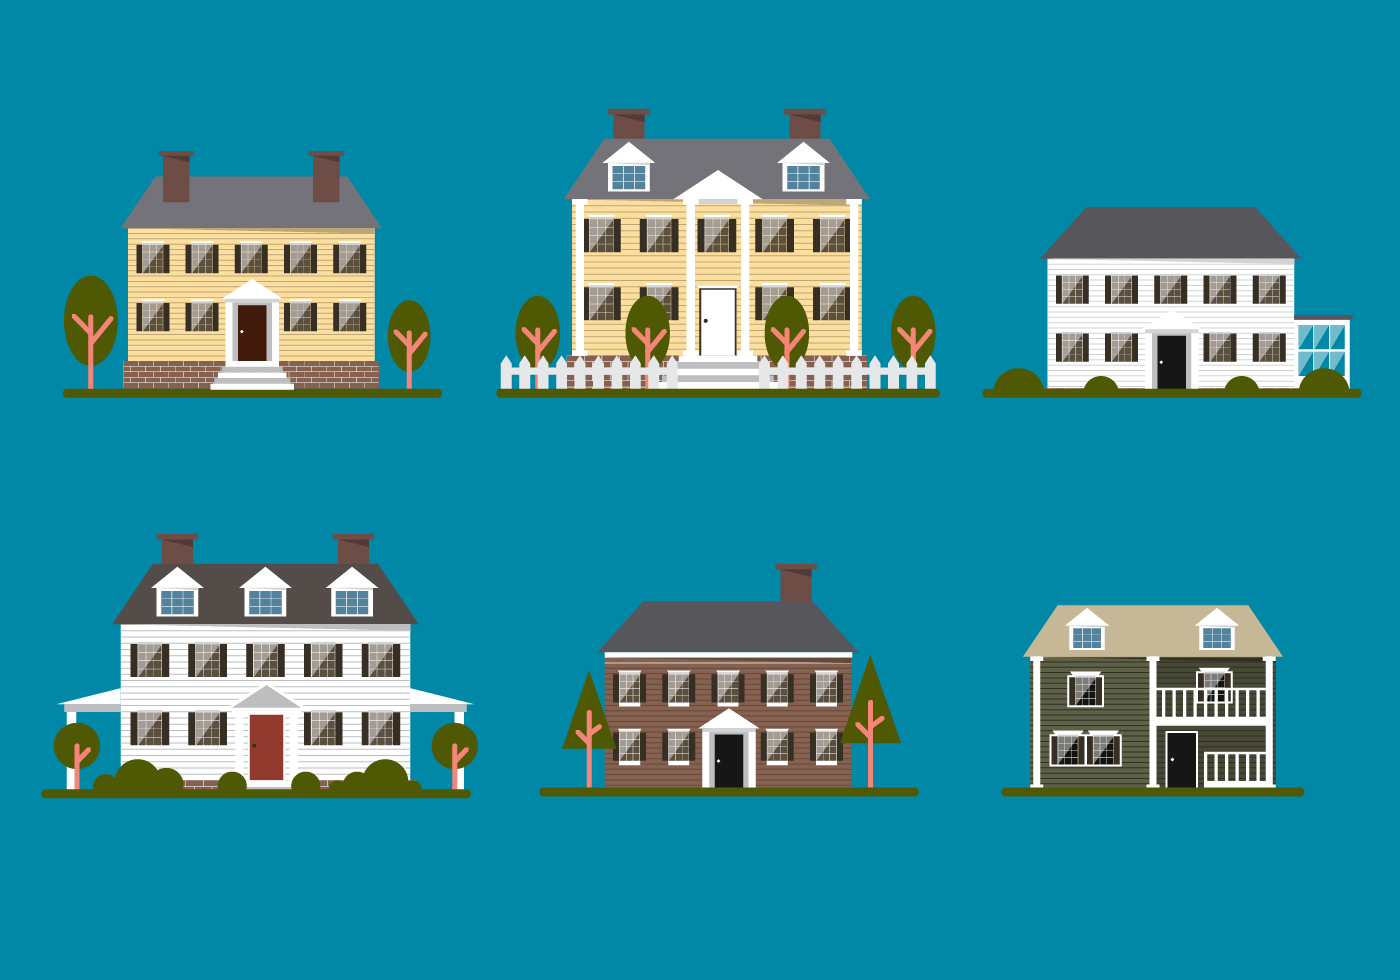 Old Colonial Home Vector - Download Free Vectors, Clipart ... for Cricut.